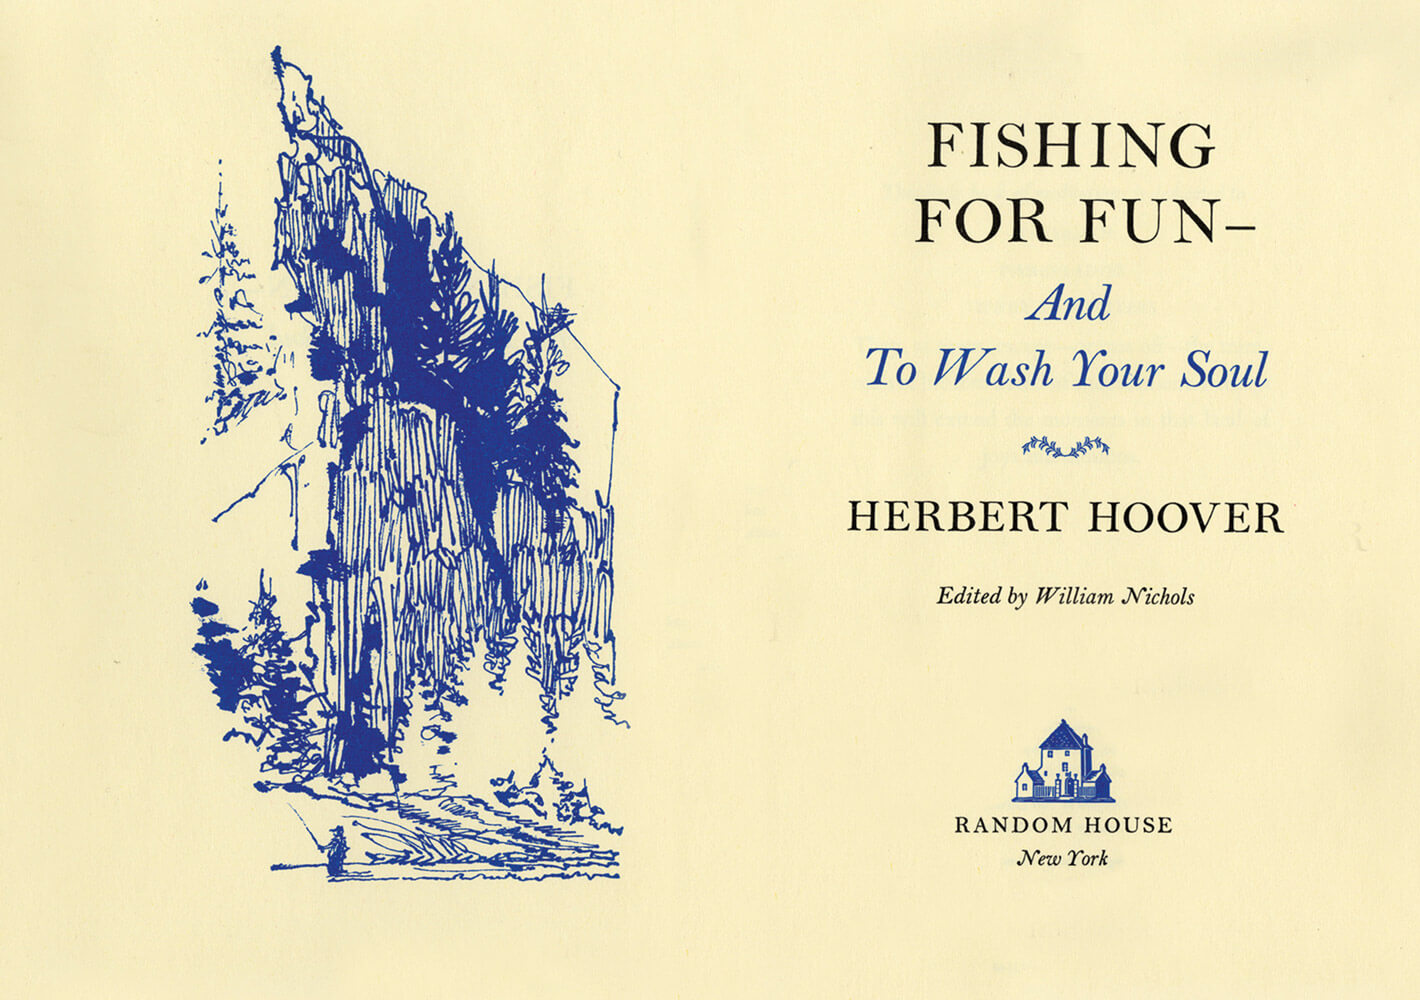 The cover page of Herbert Hoover's nineteen sixty three book 